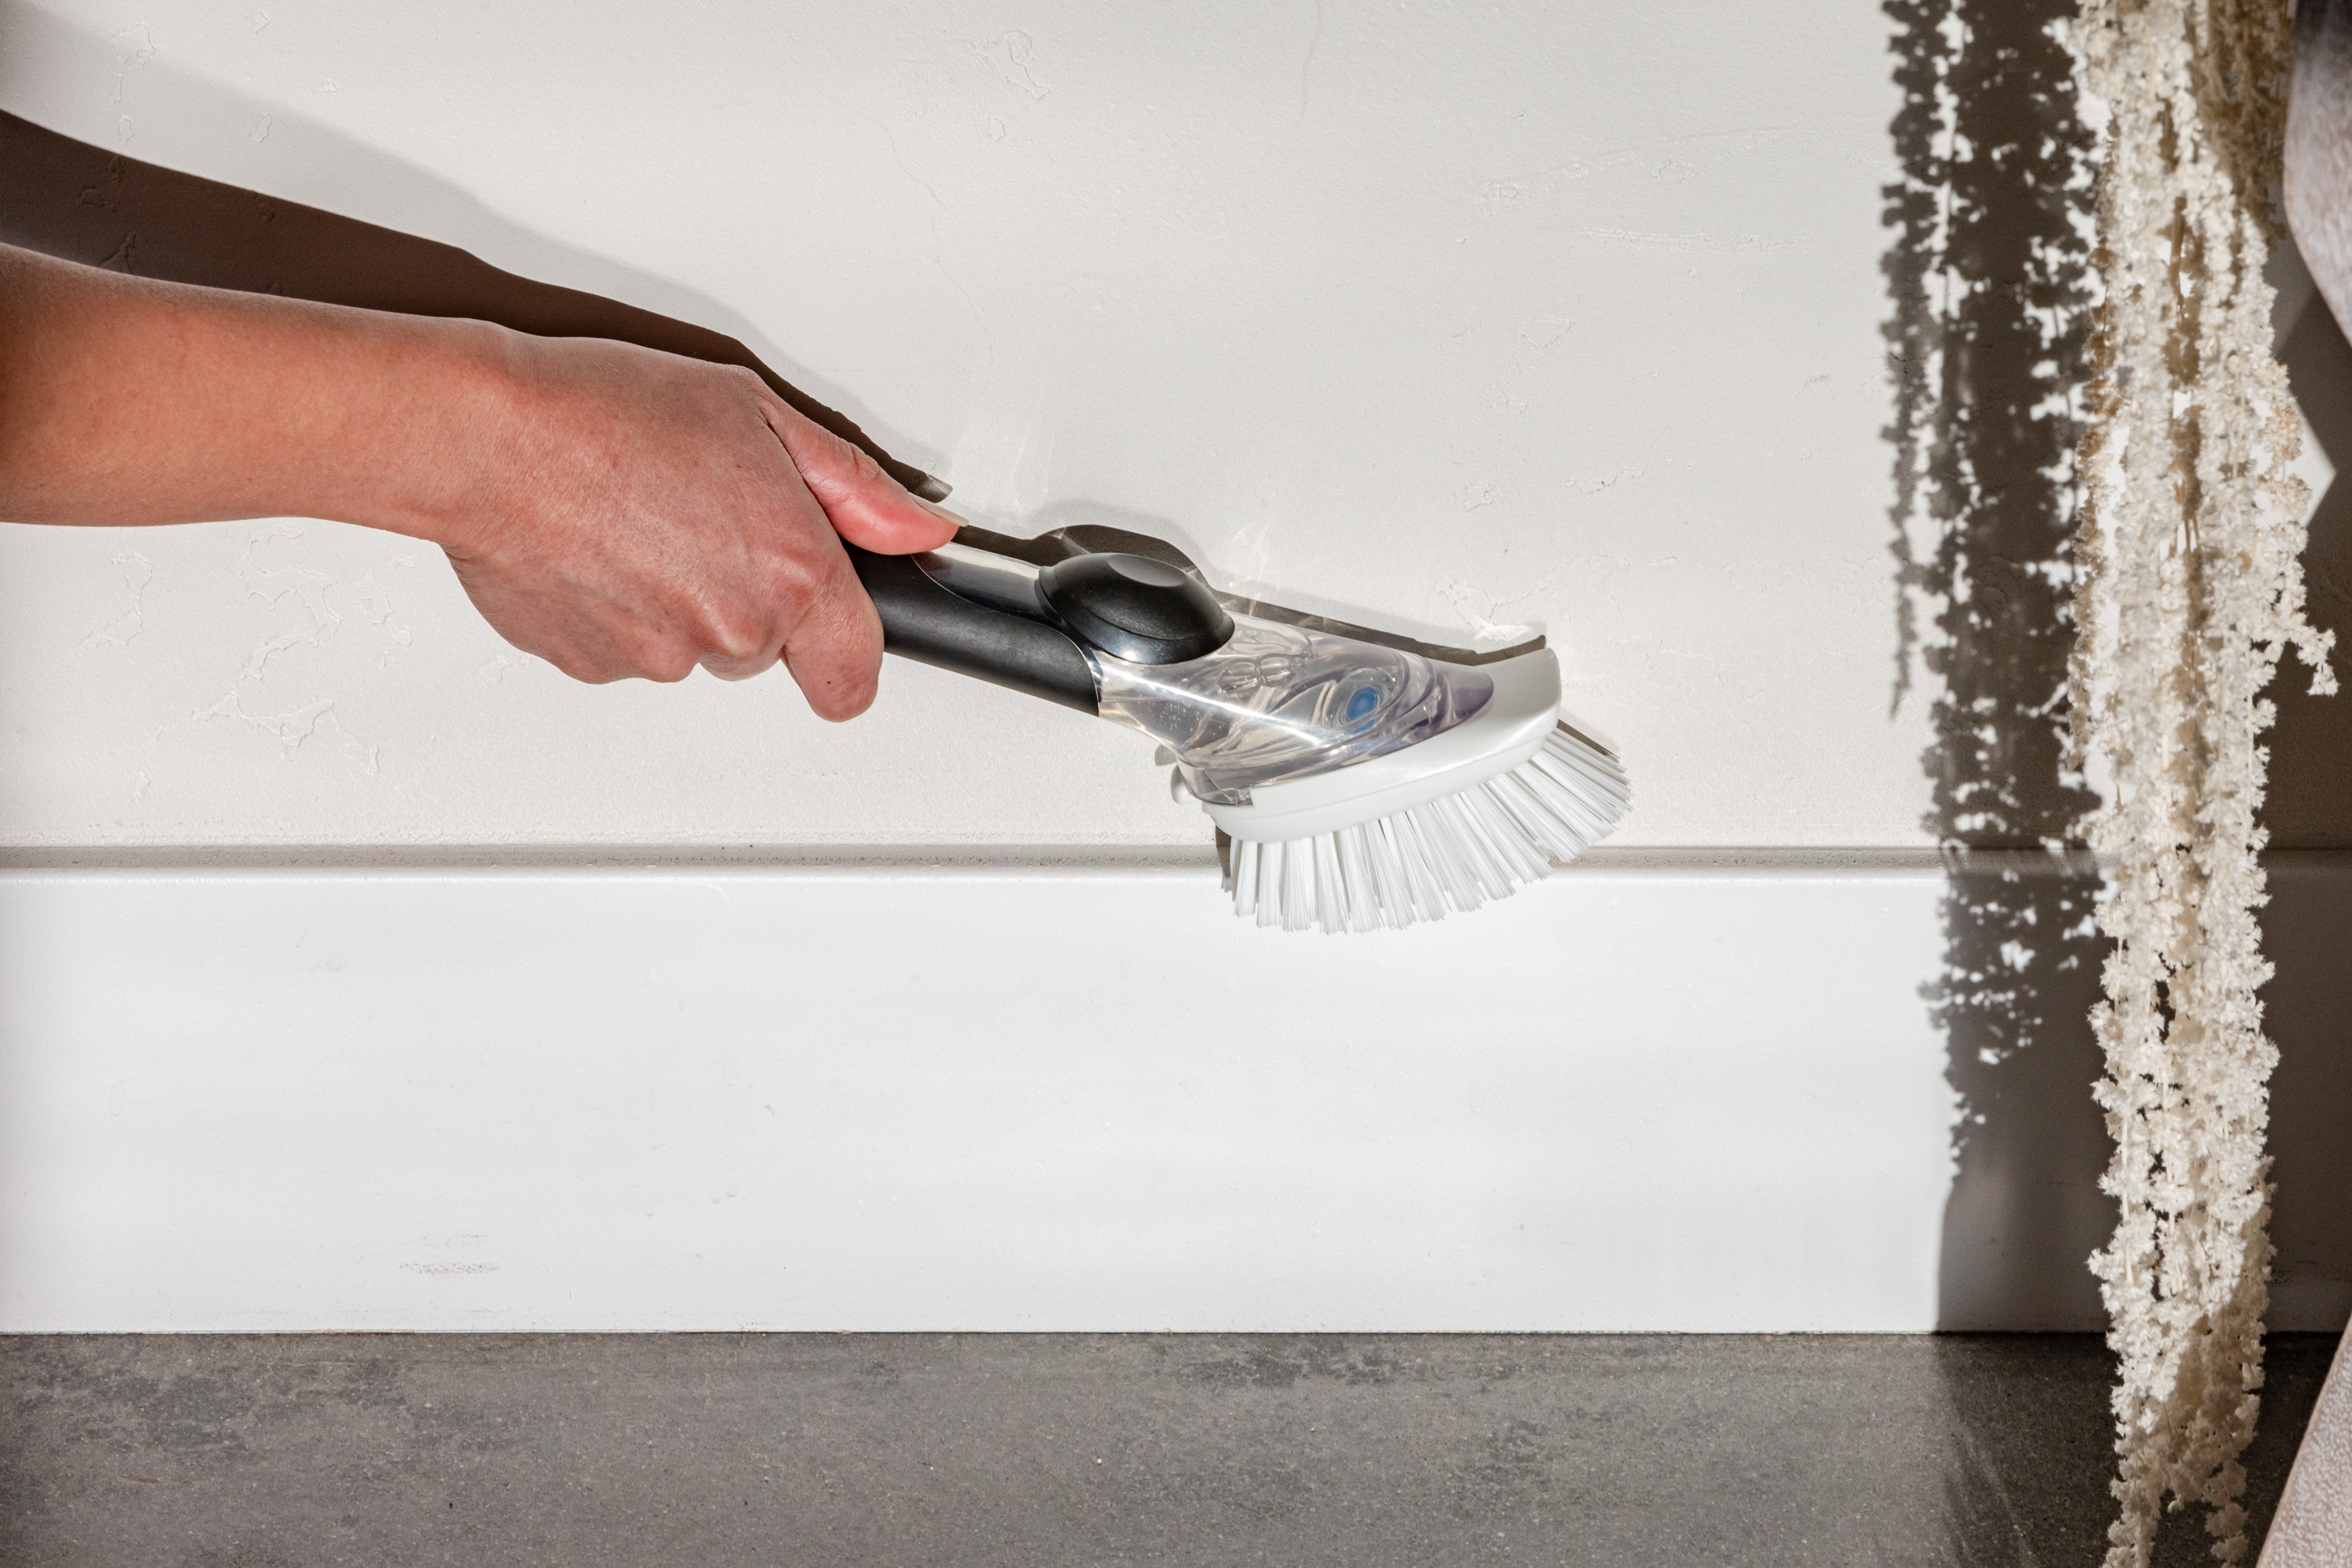 DIY BASEBOARD CLEANING TOOL  Save those backs and knees with this